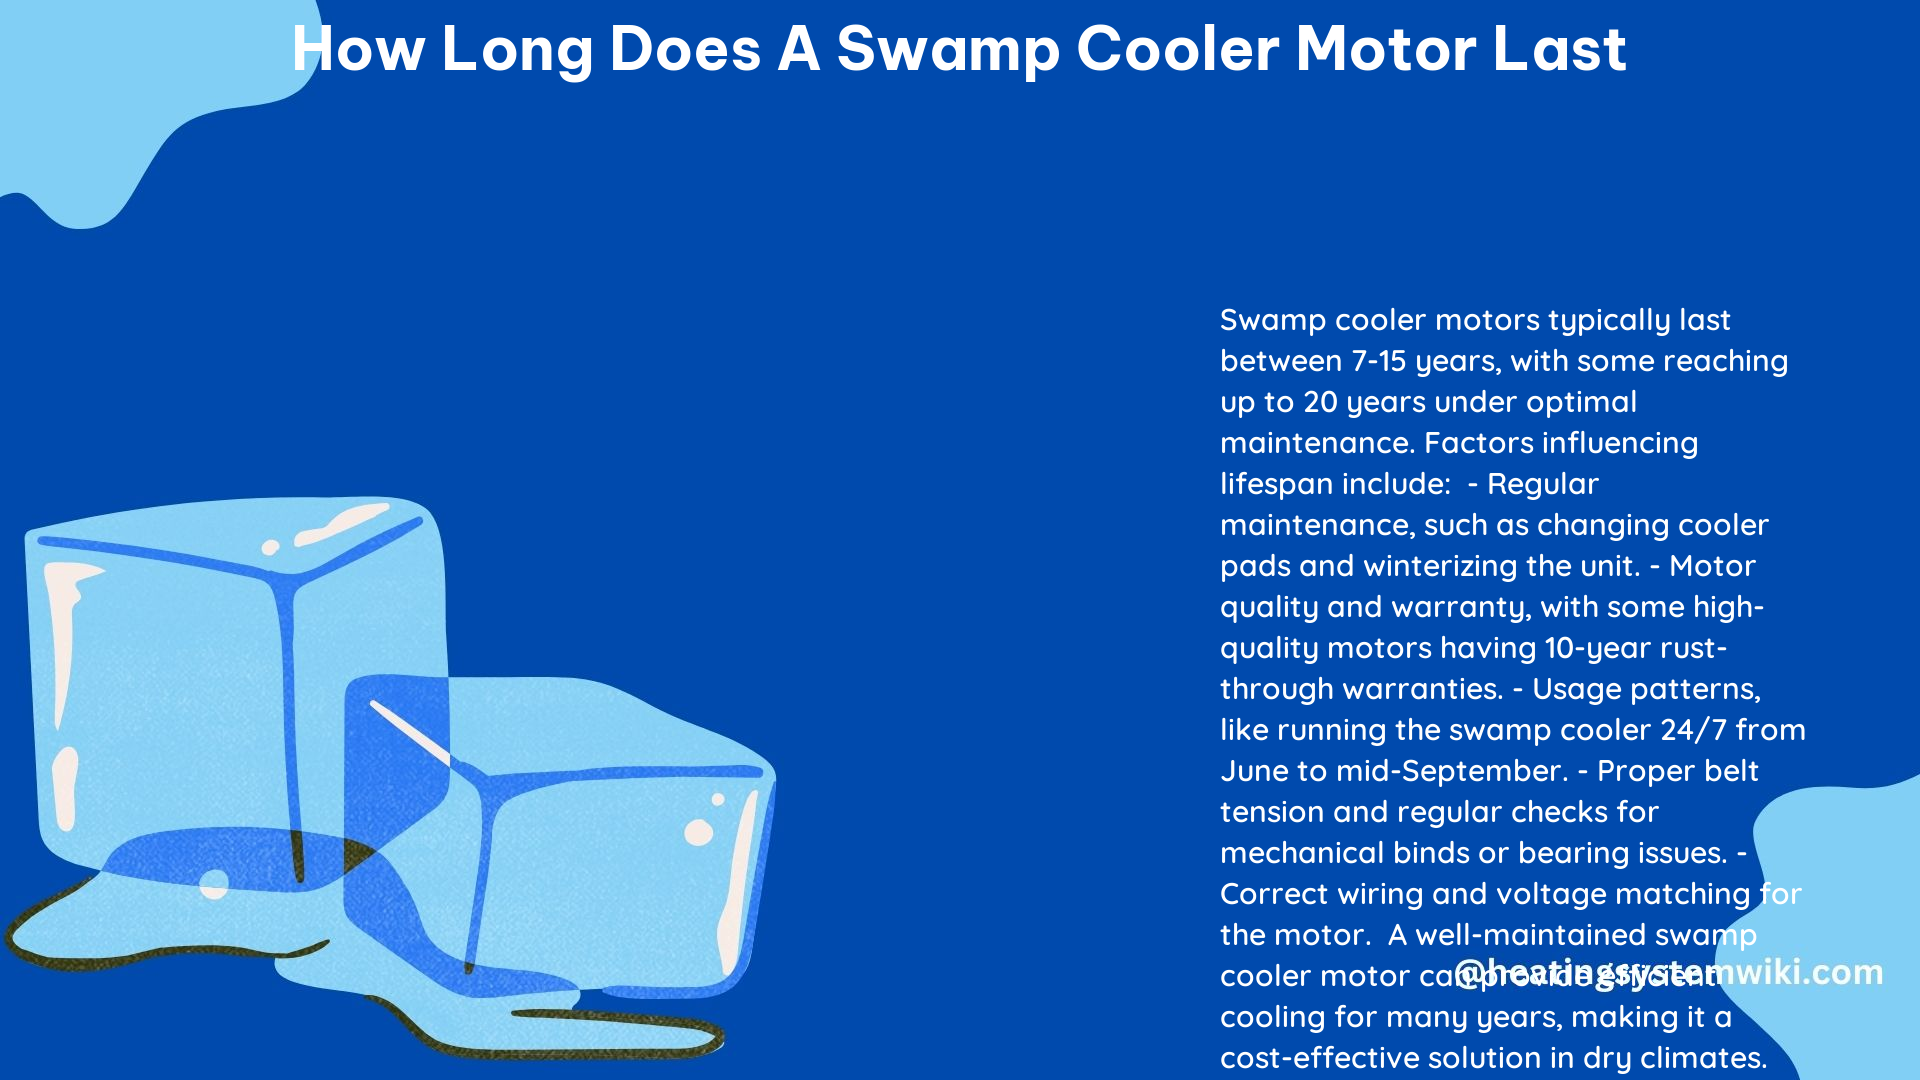 How Long Does a Swamp Cooler Motor Last